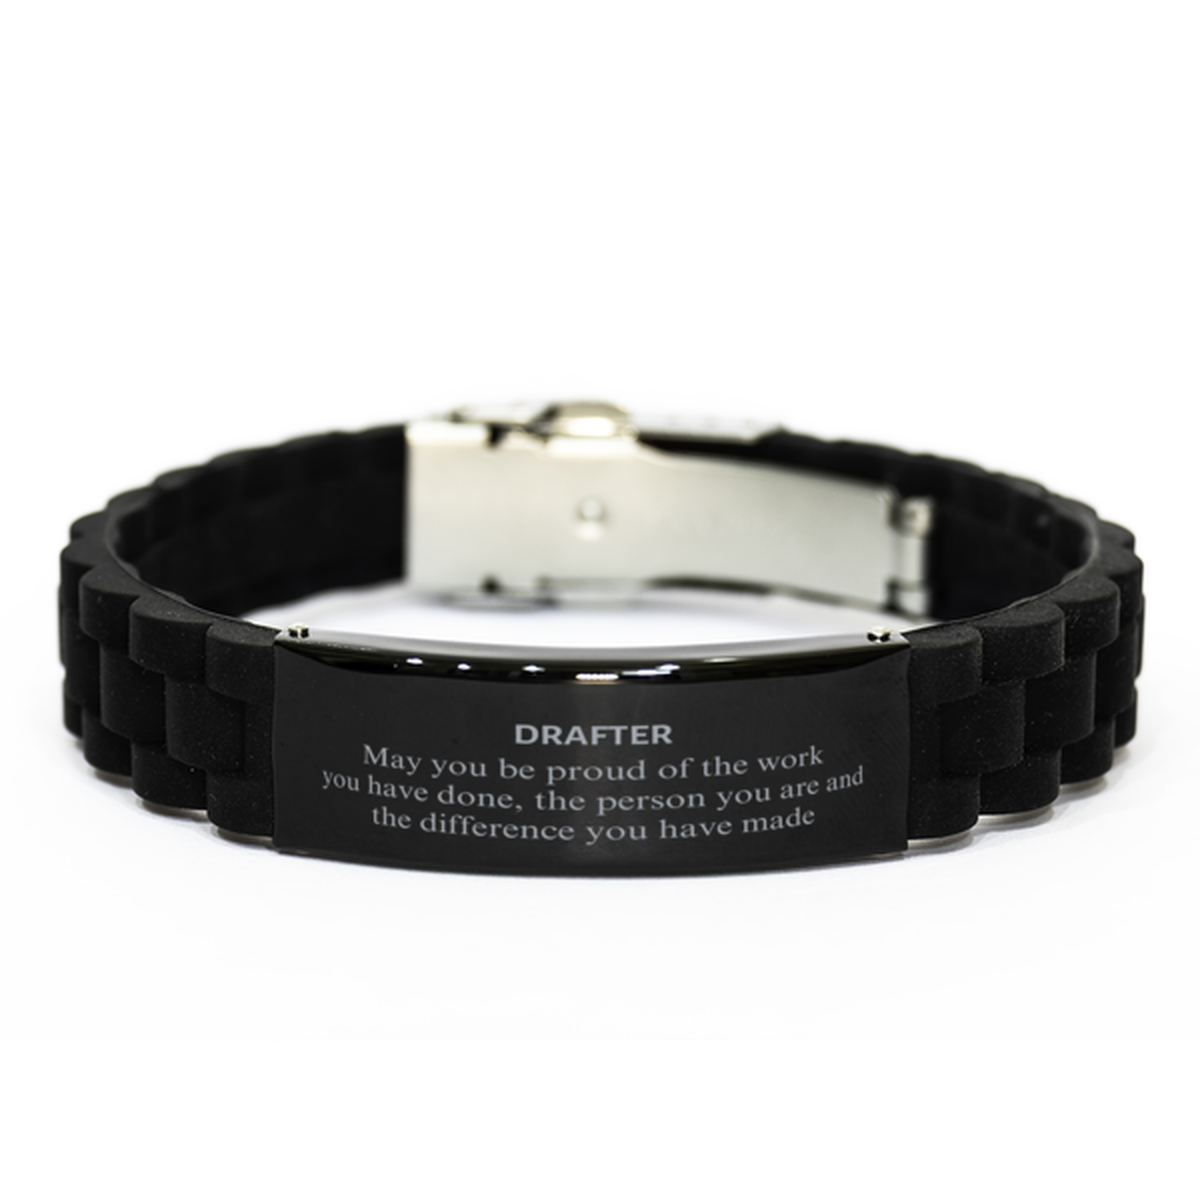 Drafter May you be proud of the work you have done, Retirement Drafter Black Glidelock Clasp Bracelet for Colleague Appreciation Gifts Amazing for Drafter